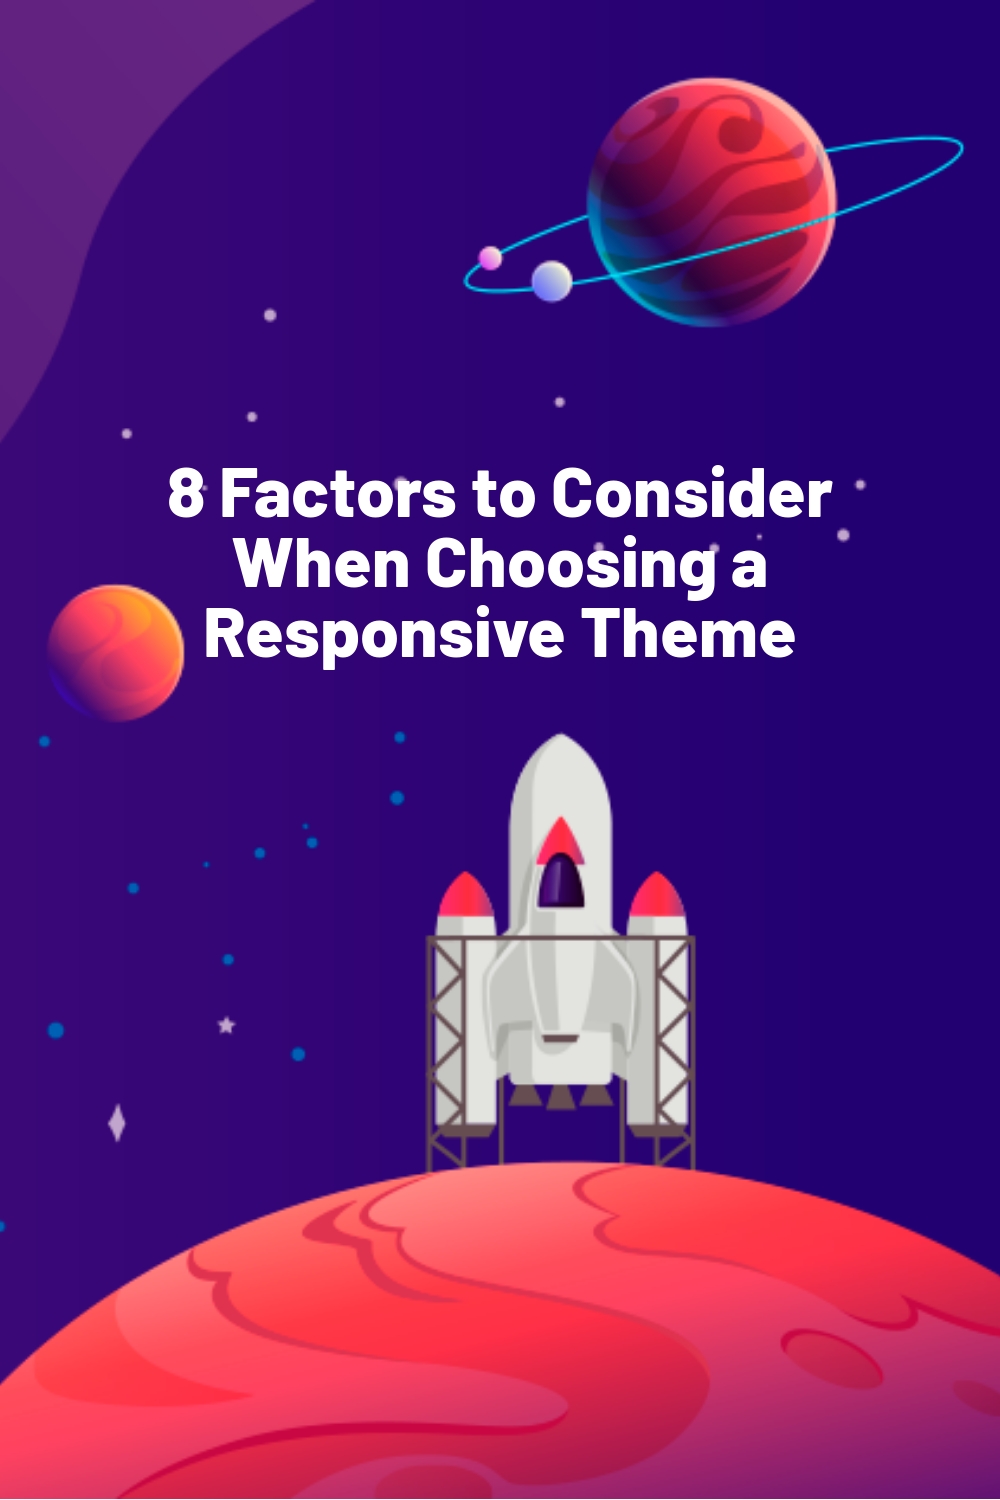 8 Factors to Consider When Choosing a Responsive Theme